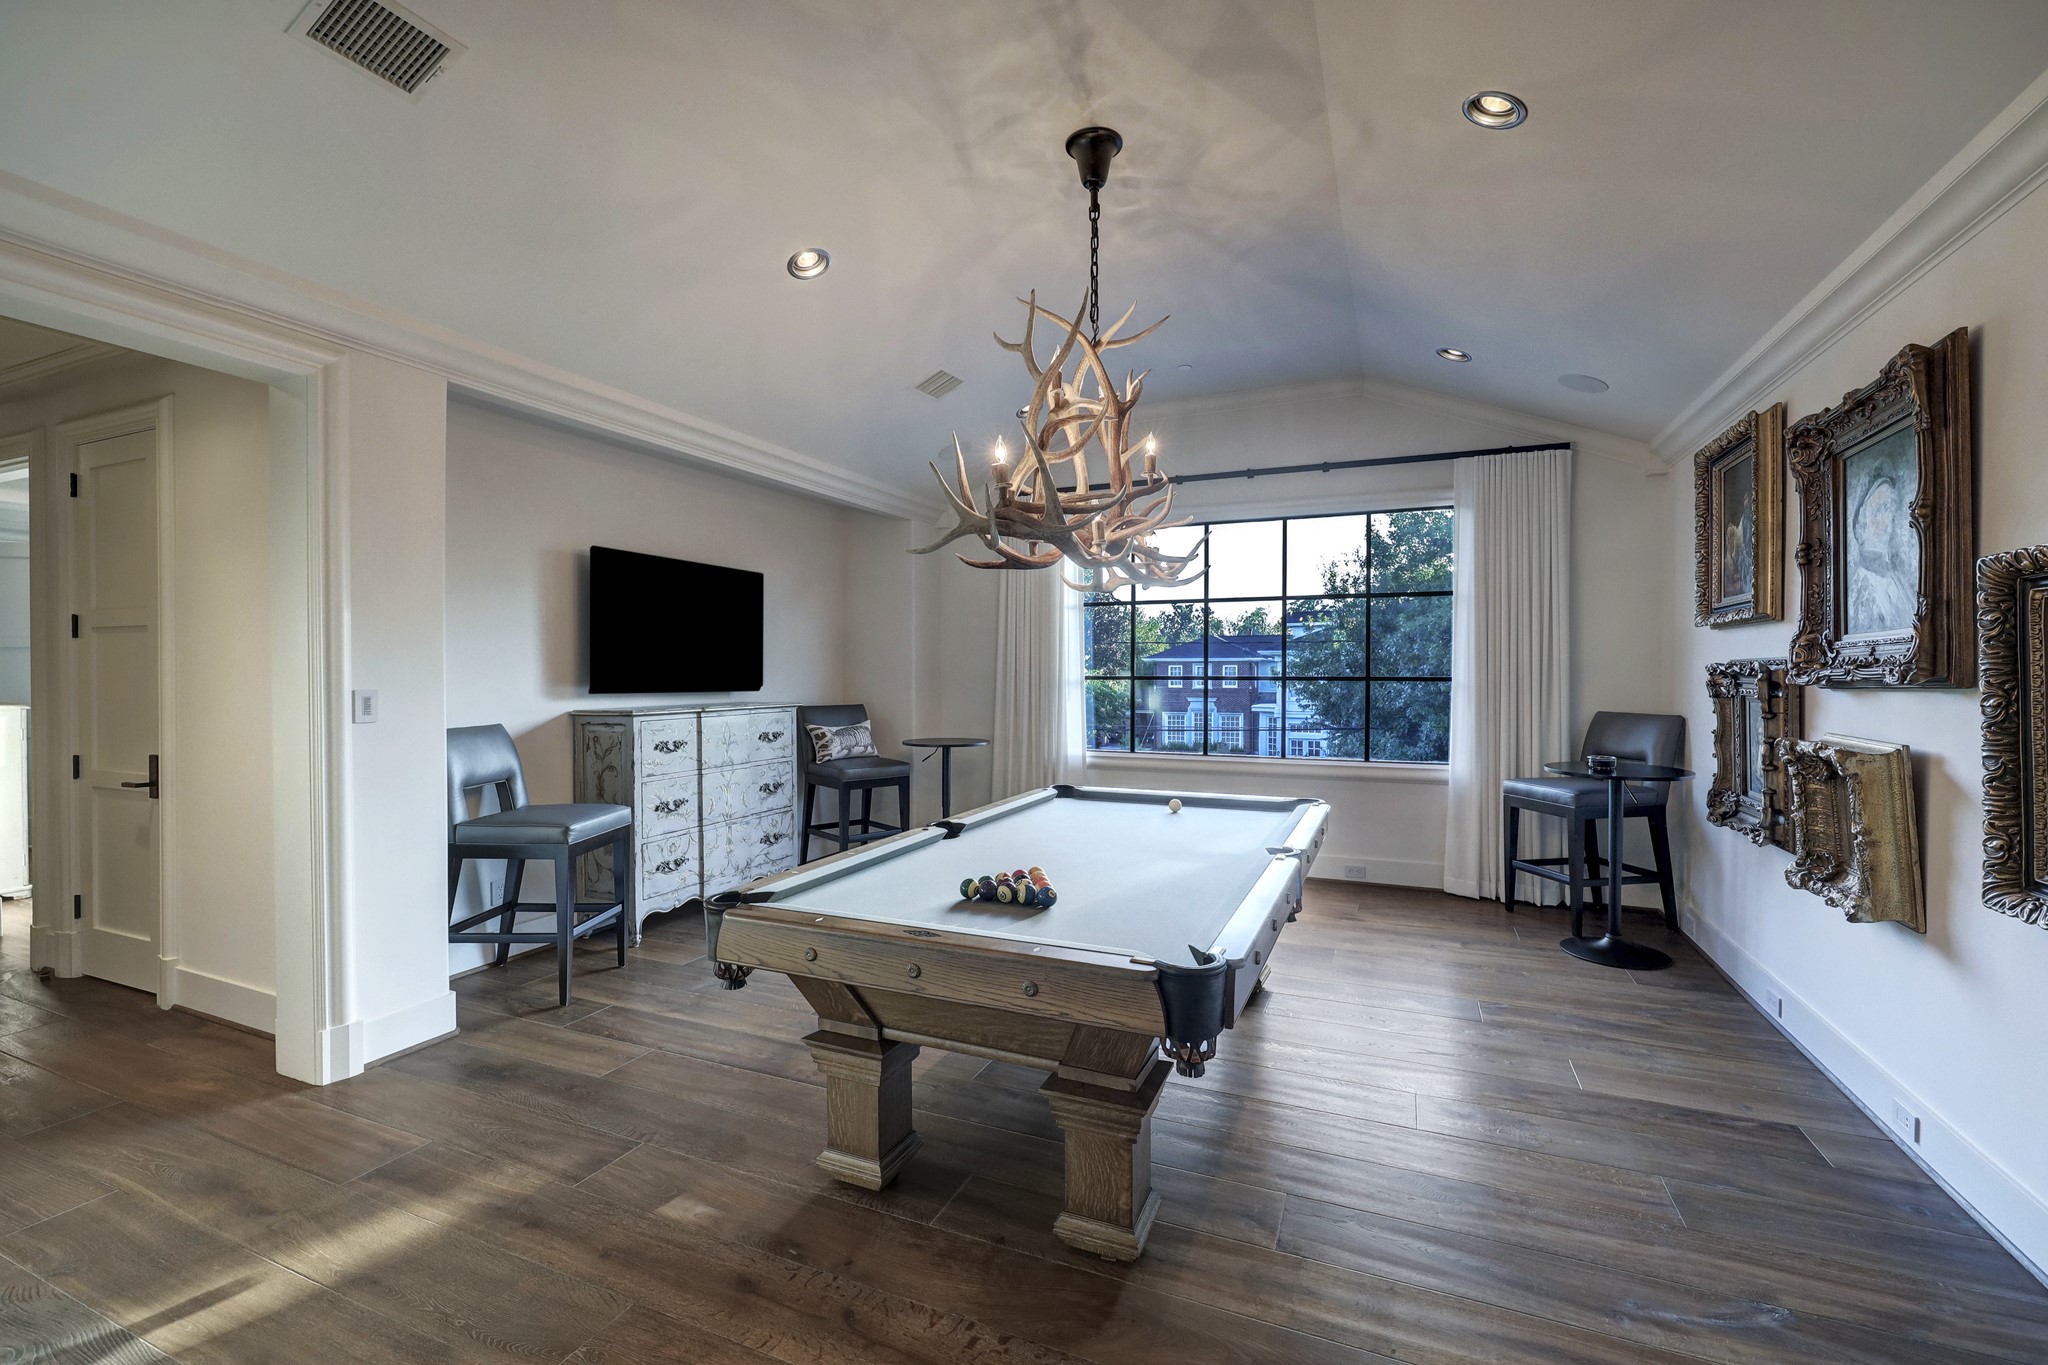 The second floor game room (20 x 15) has 11 foot vaulted ceilings and an impressive Antler chandelier.